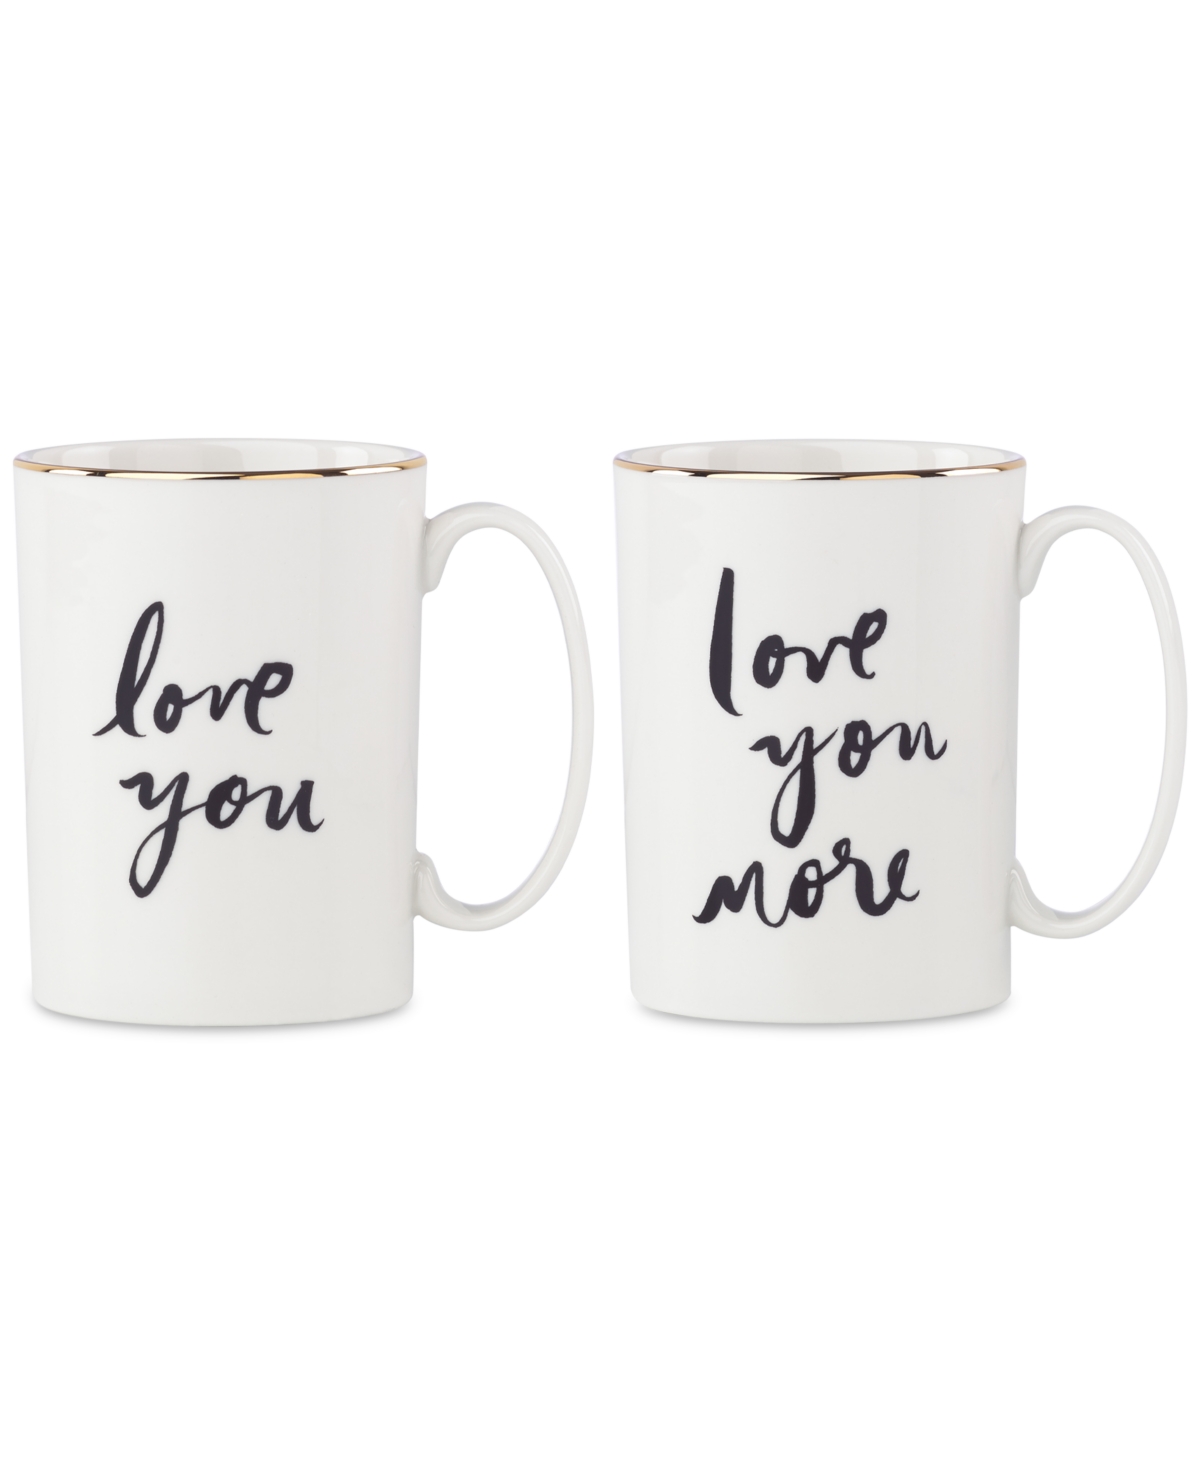 Bridal Party Love You Mugs, Set of 2 - White